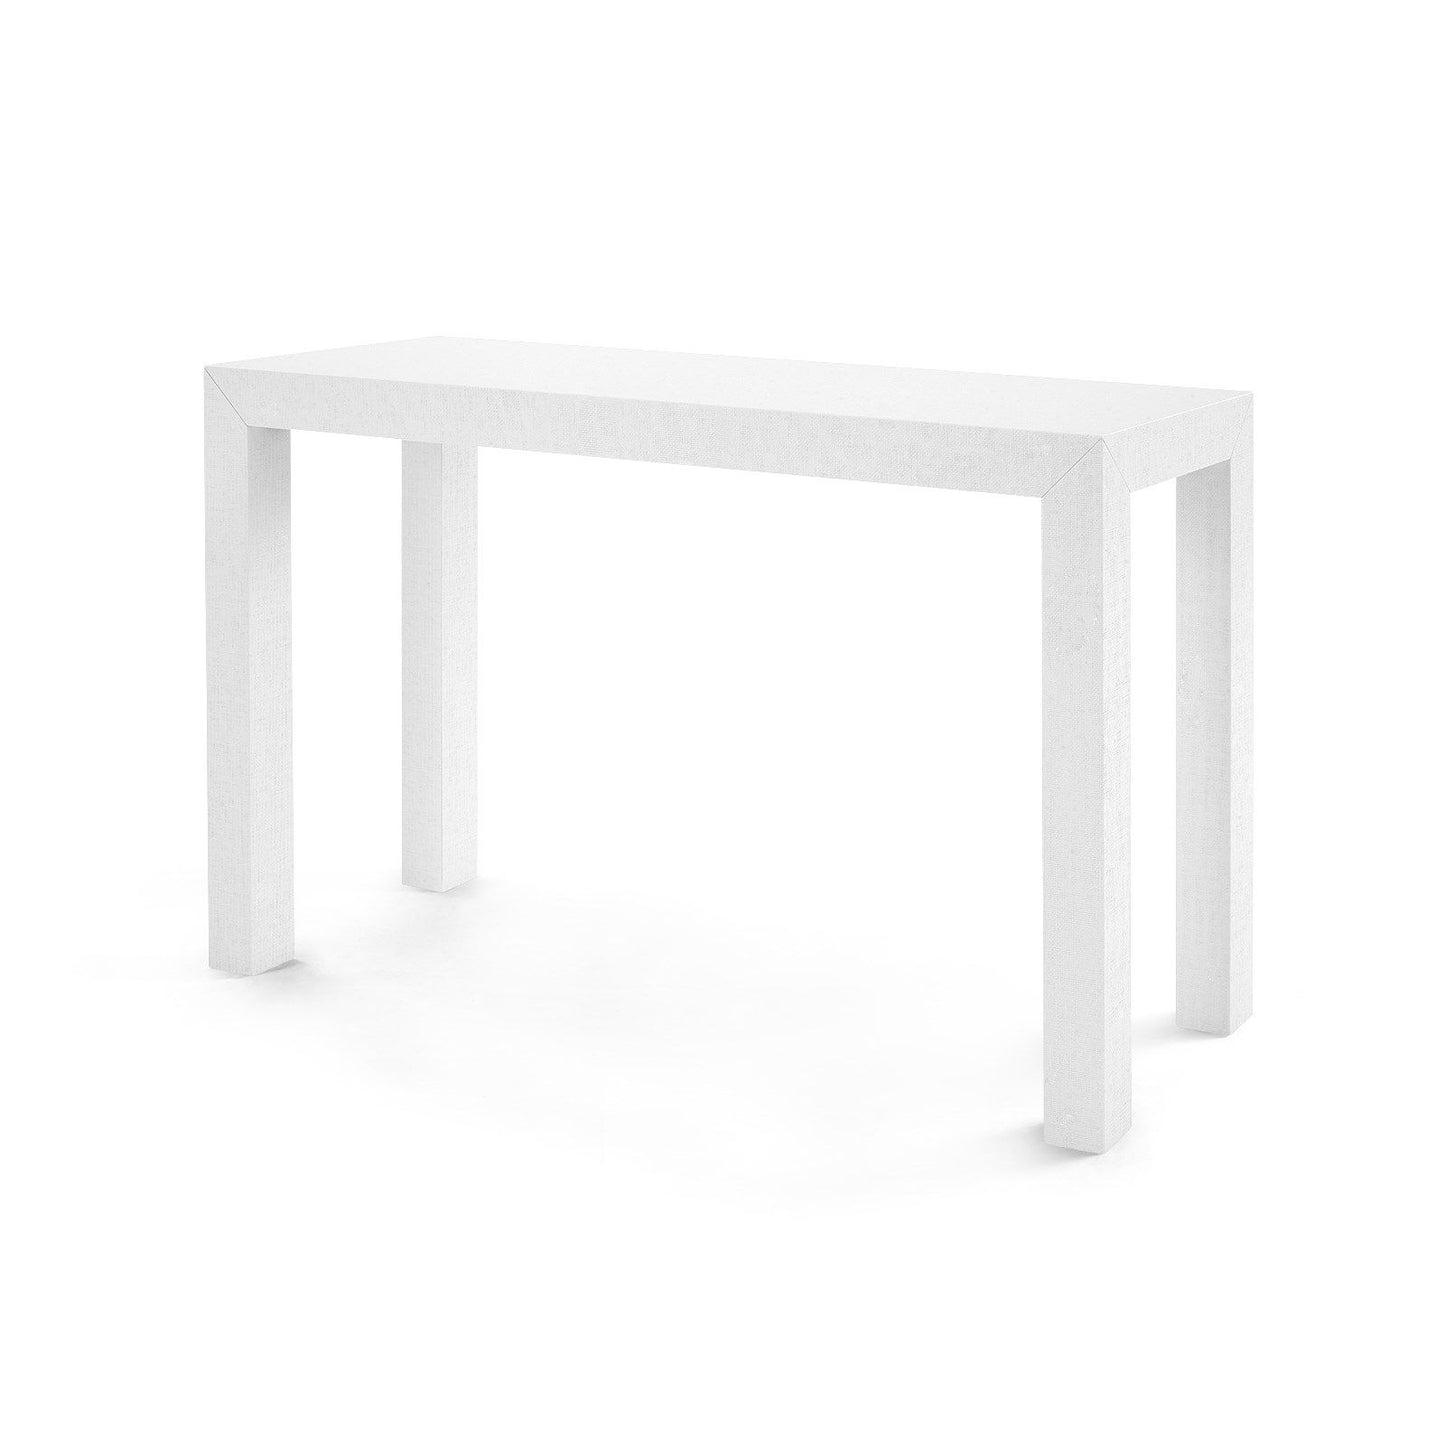 Parsons Console Table WhiteTable Bungalow 5  White   Four Hands, Burke Decor, Mid Century Modern Furniture, Old Bones Furniture Company, Old Bones Co, Modern Mid Century, Designer Furniture, https://www.oldbonesco.com/